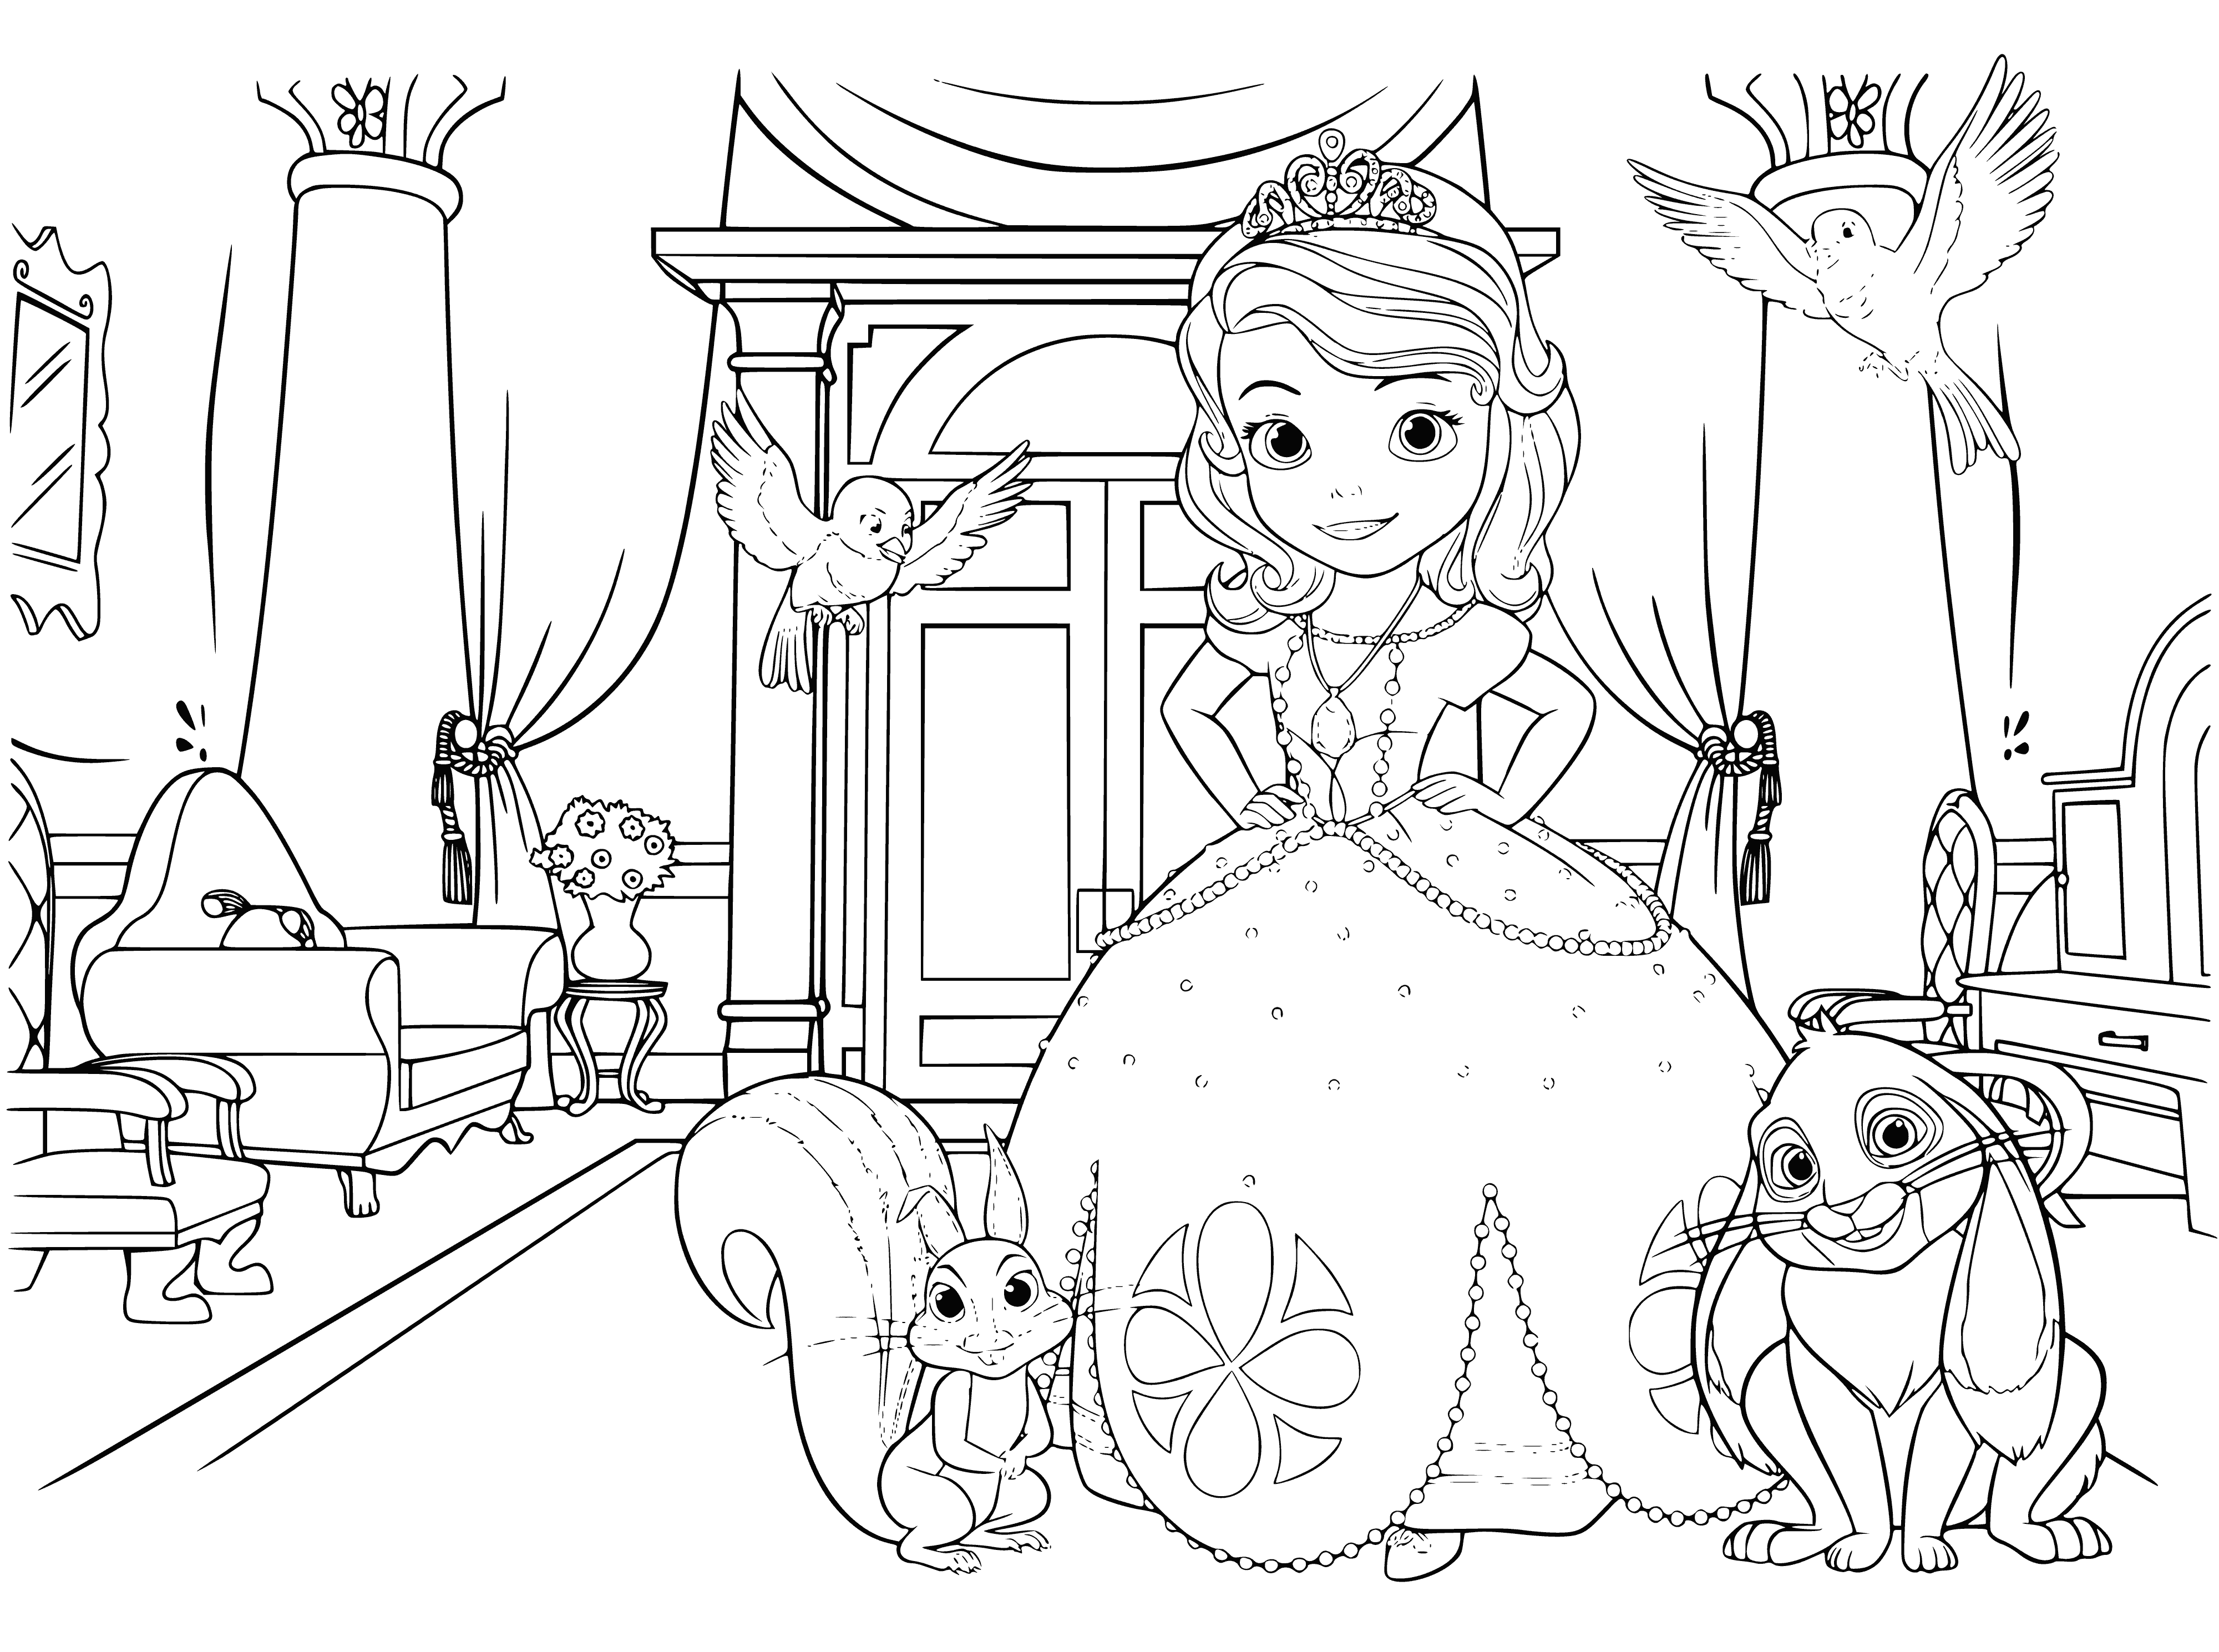 Sofia in the palace coloring page